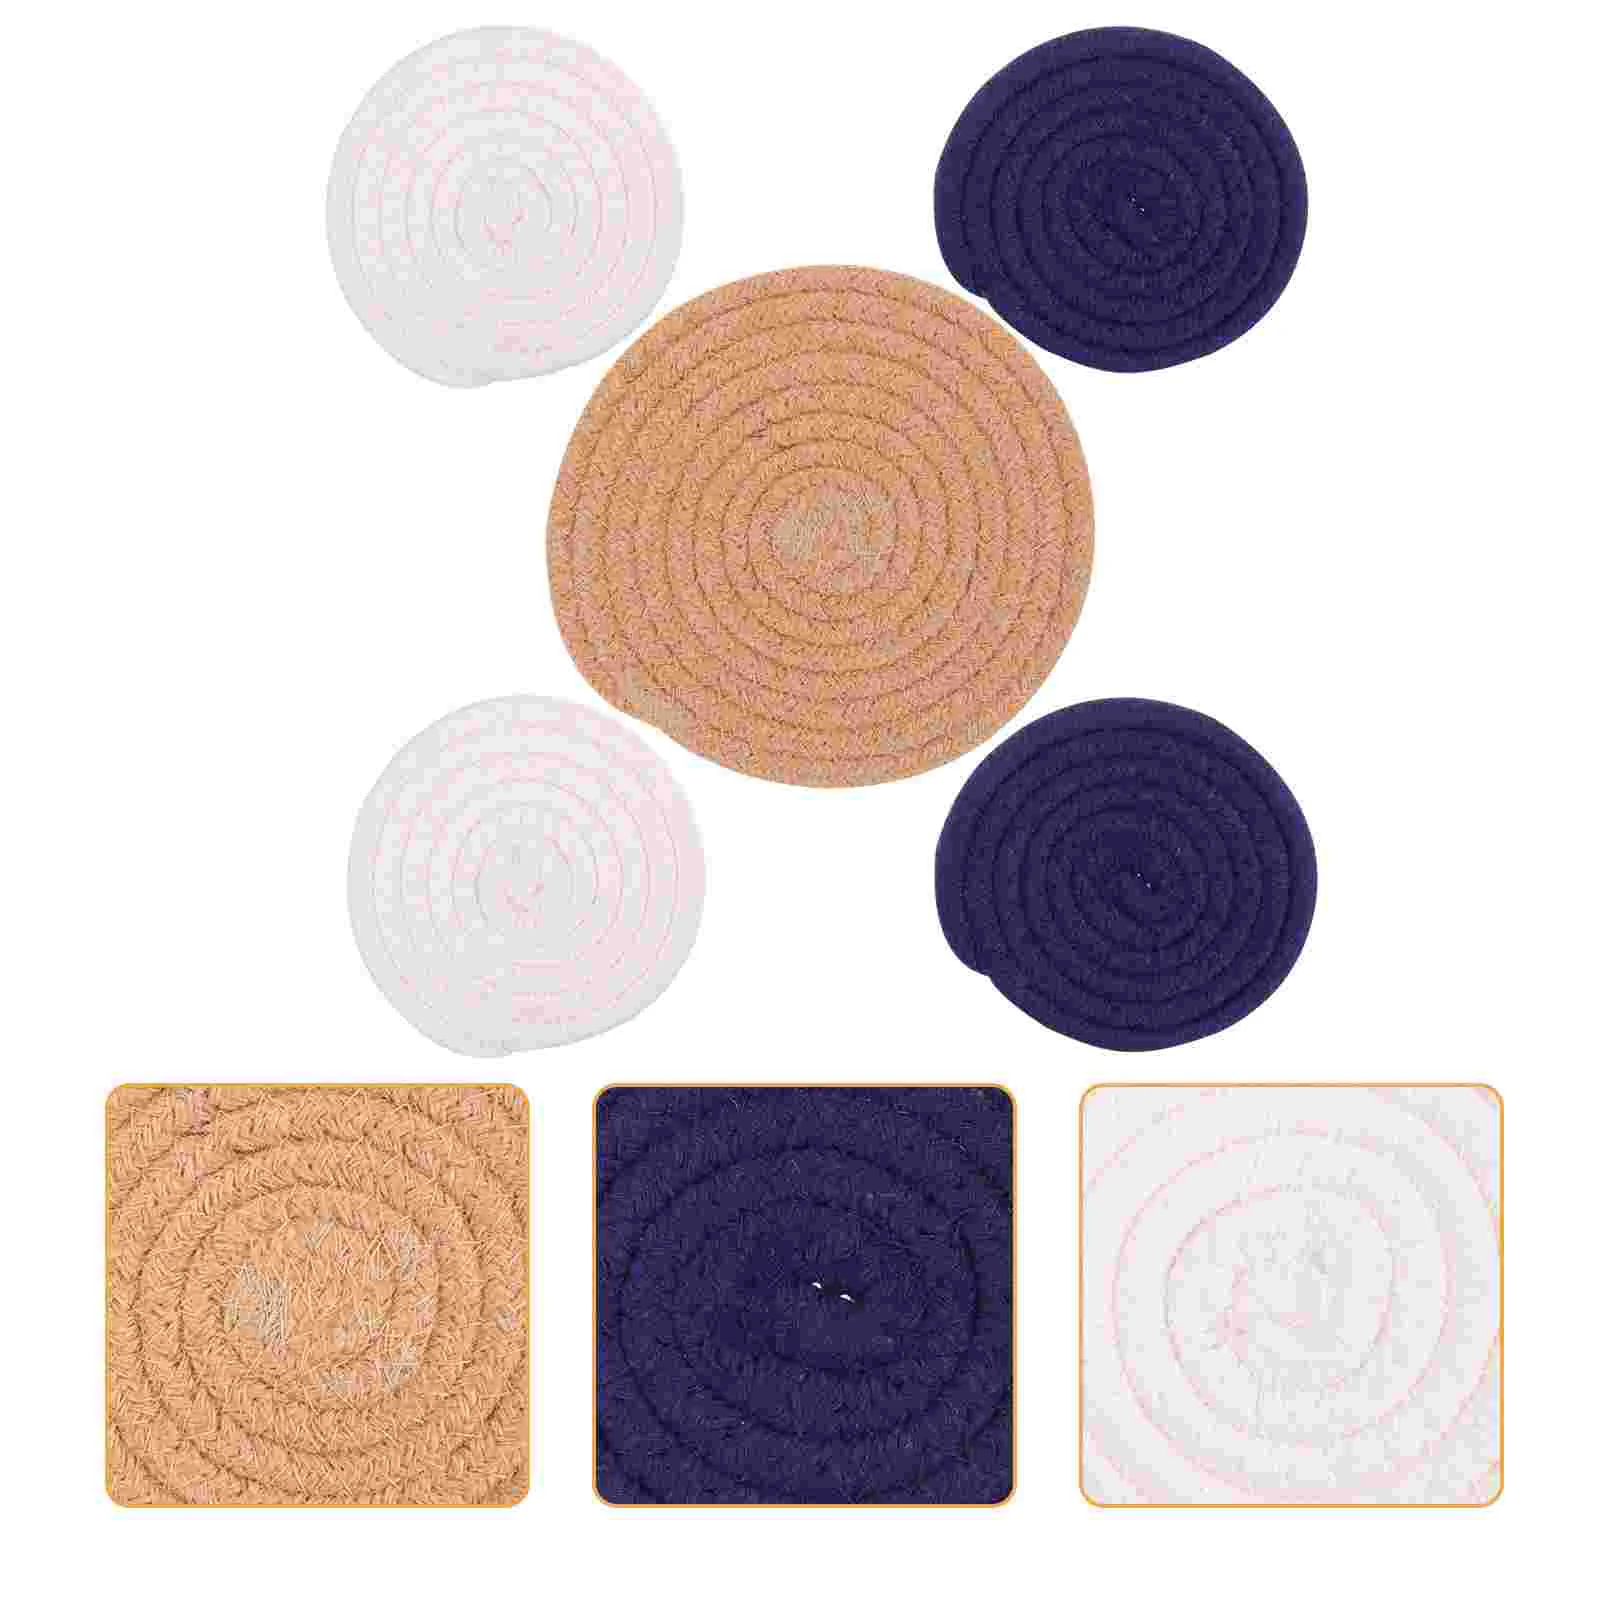 

Coaster Placemat Mat Round Placemats Woven Table Place Cutlery Dining Resistant Cotton Rope Hot Coffee Non Beverage Kitchenpad